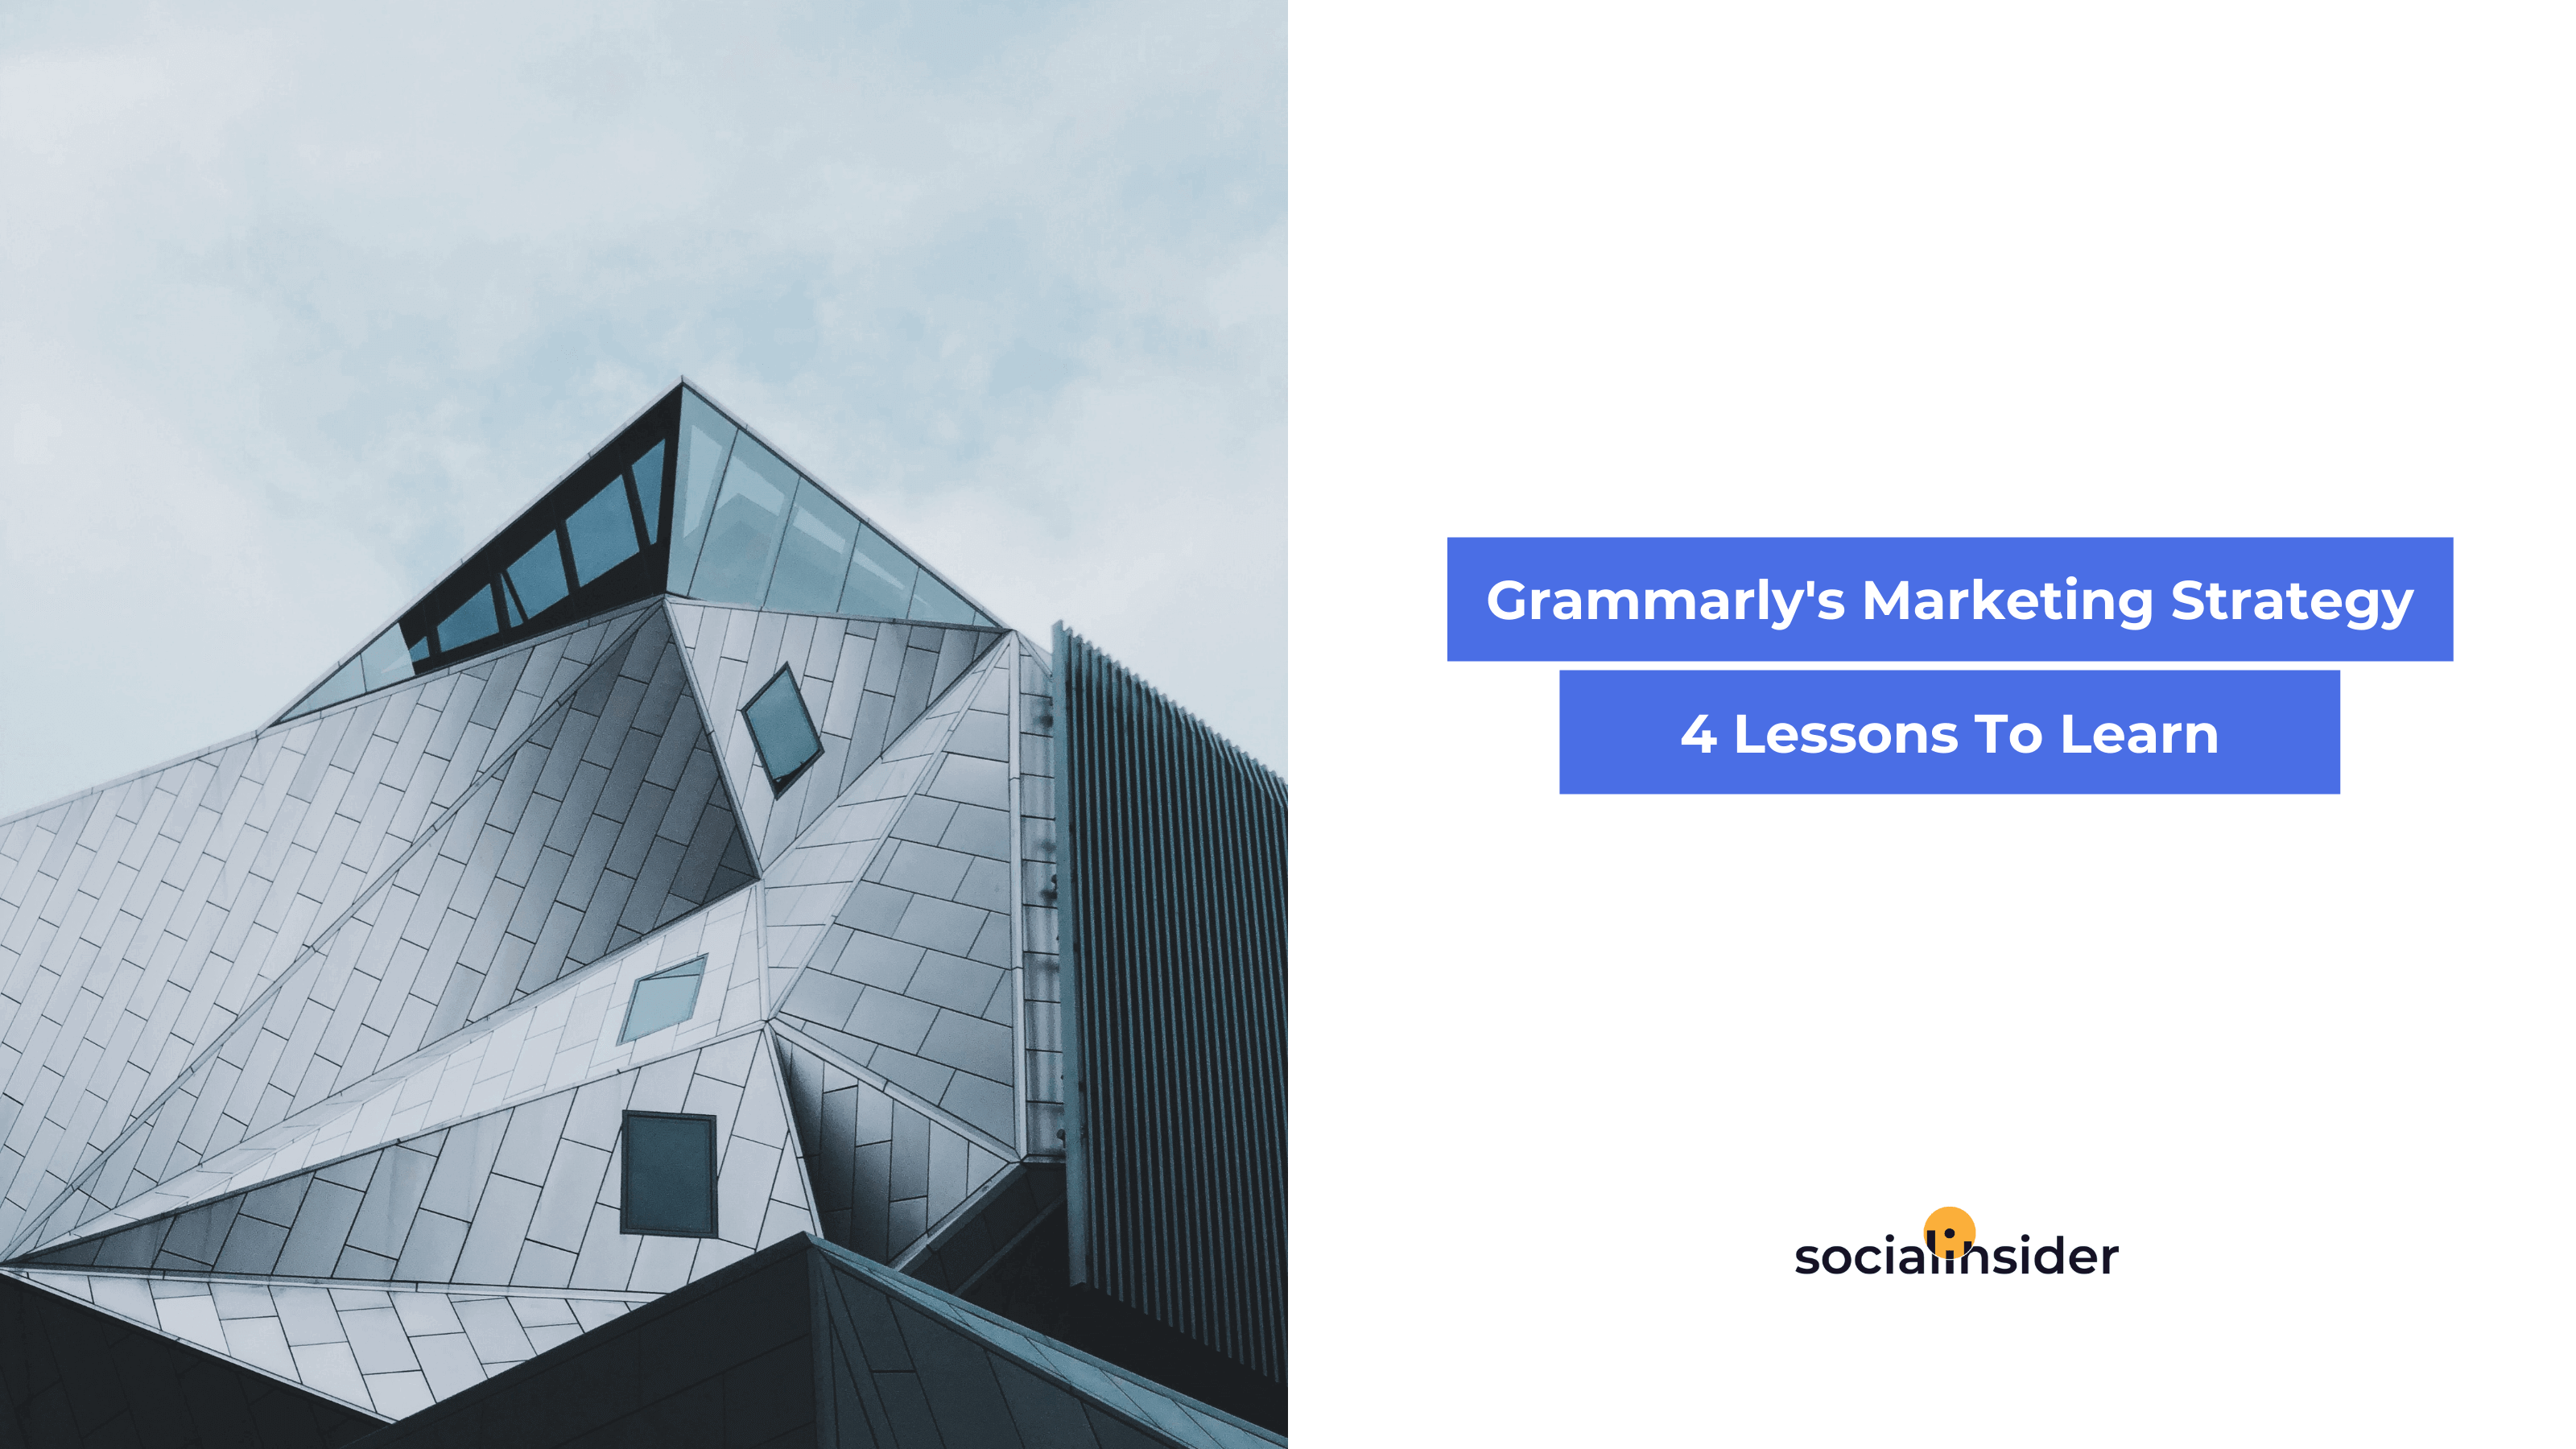 Grammarly's Marketing Strategy - Lessons To Learn | Socialinsider